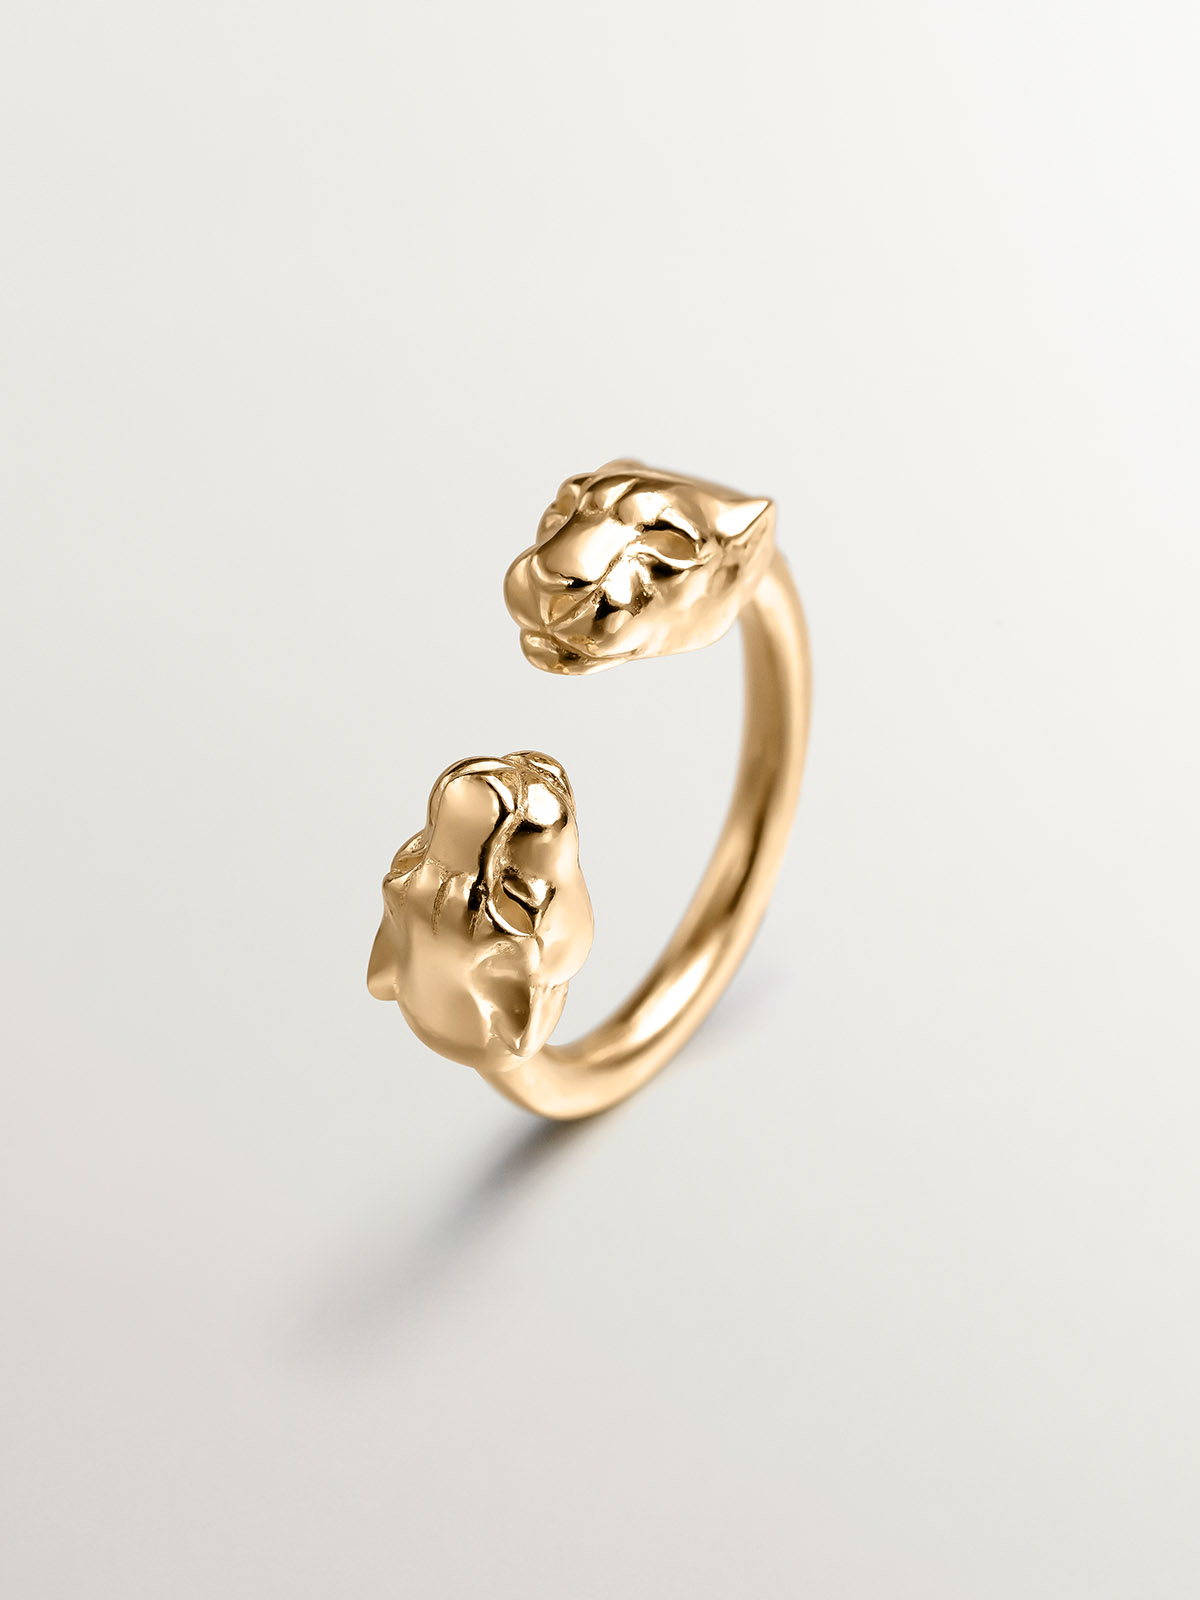 You and I ring made of 925 silver, bathed in 18K yellow gold with panther heads.